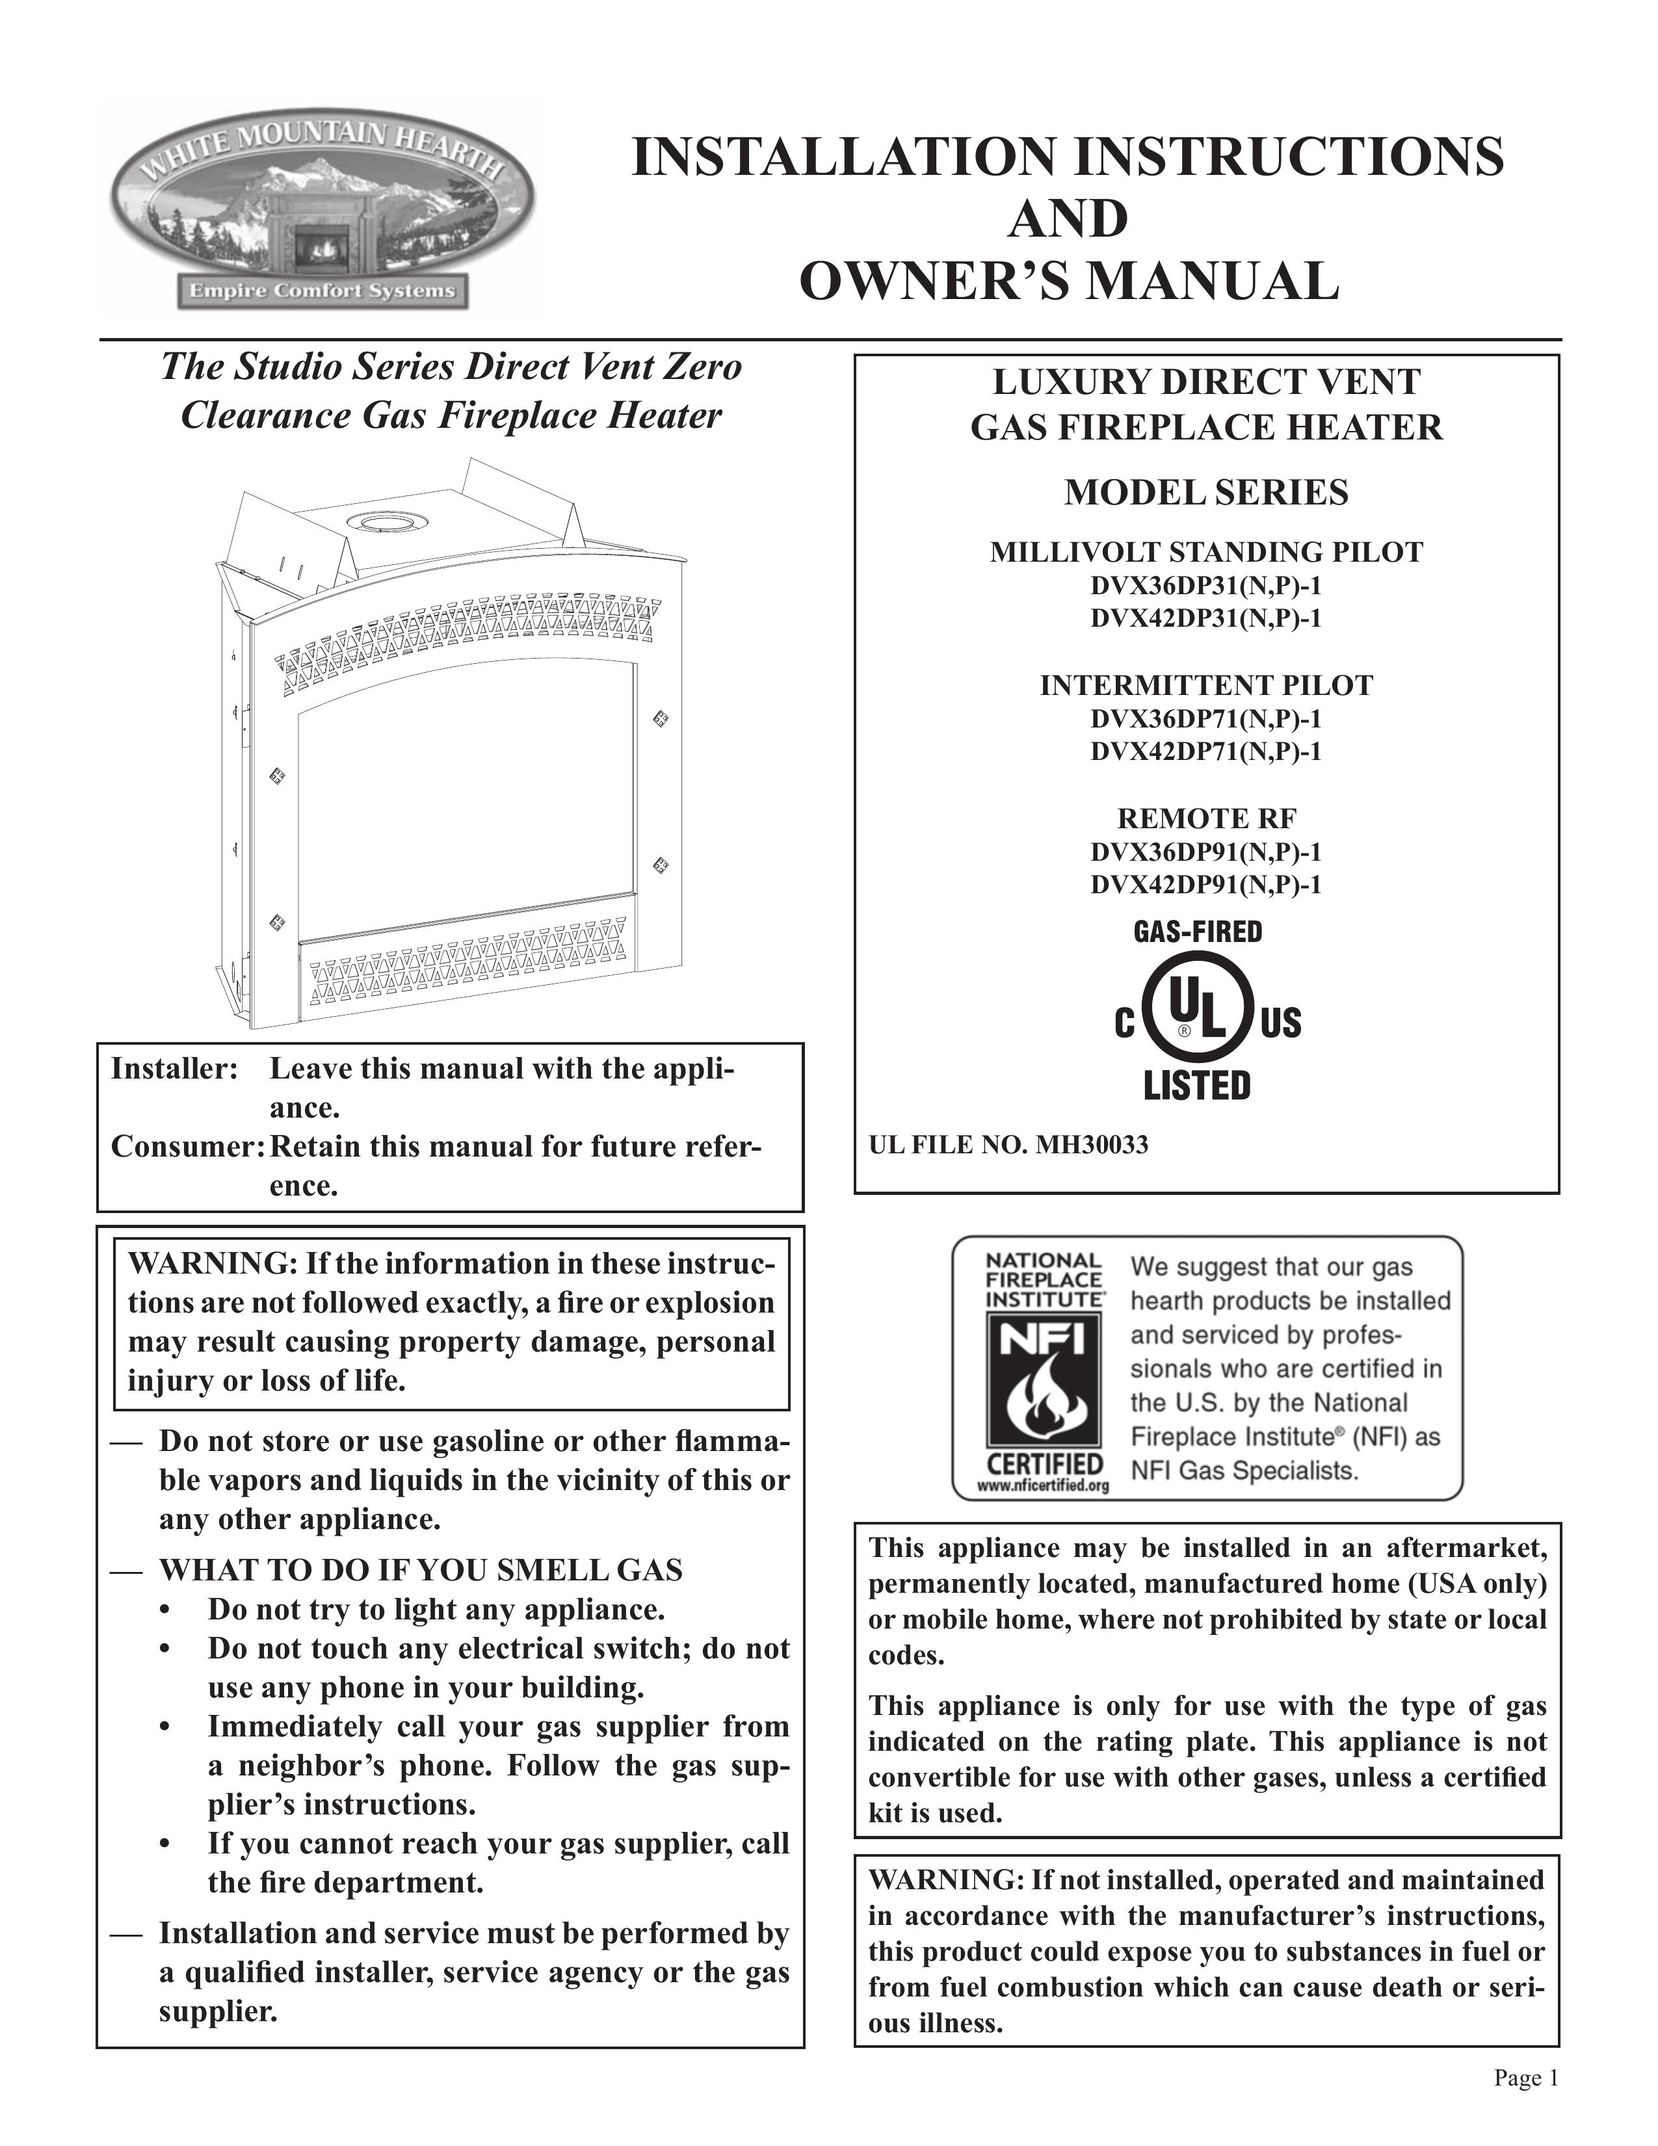 Empire Comfort Systems DVX36DP91(N,P)-1 Gas Heater User Manual